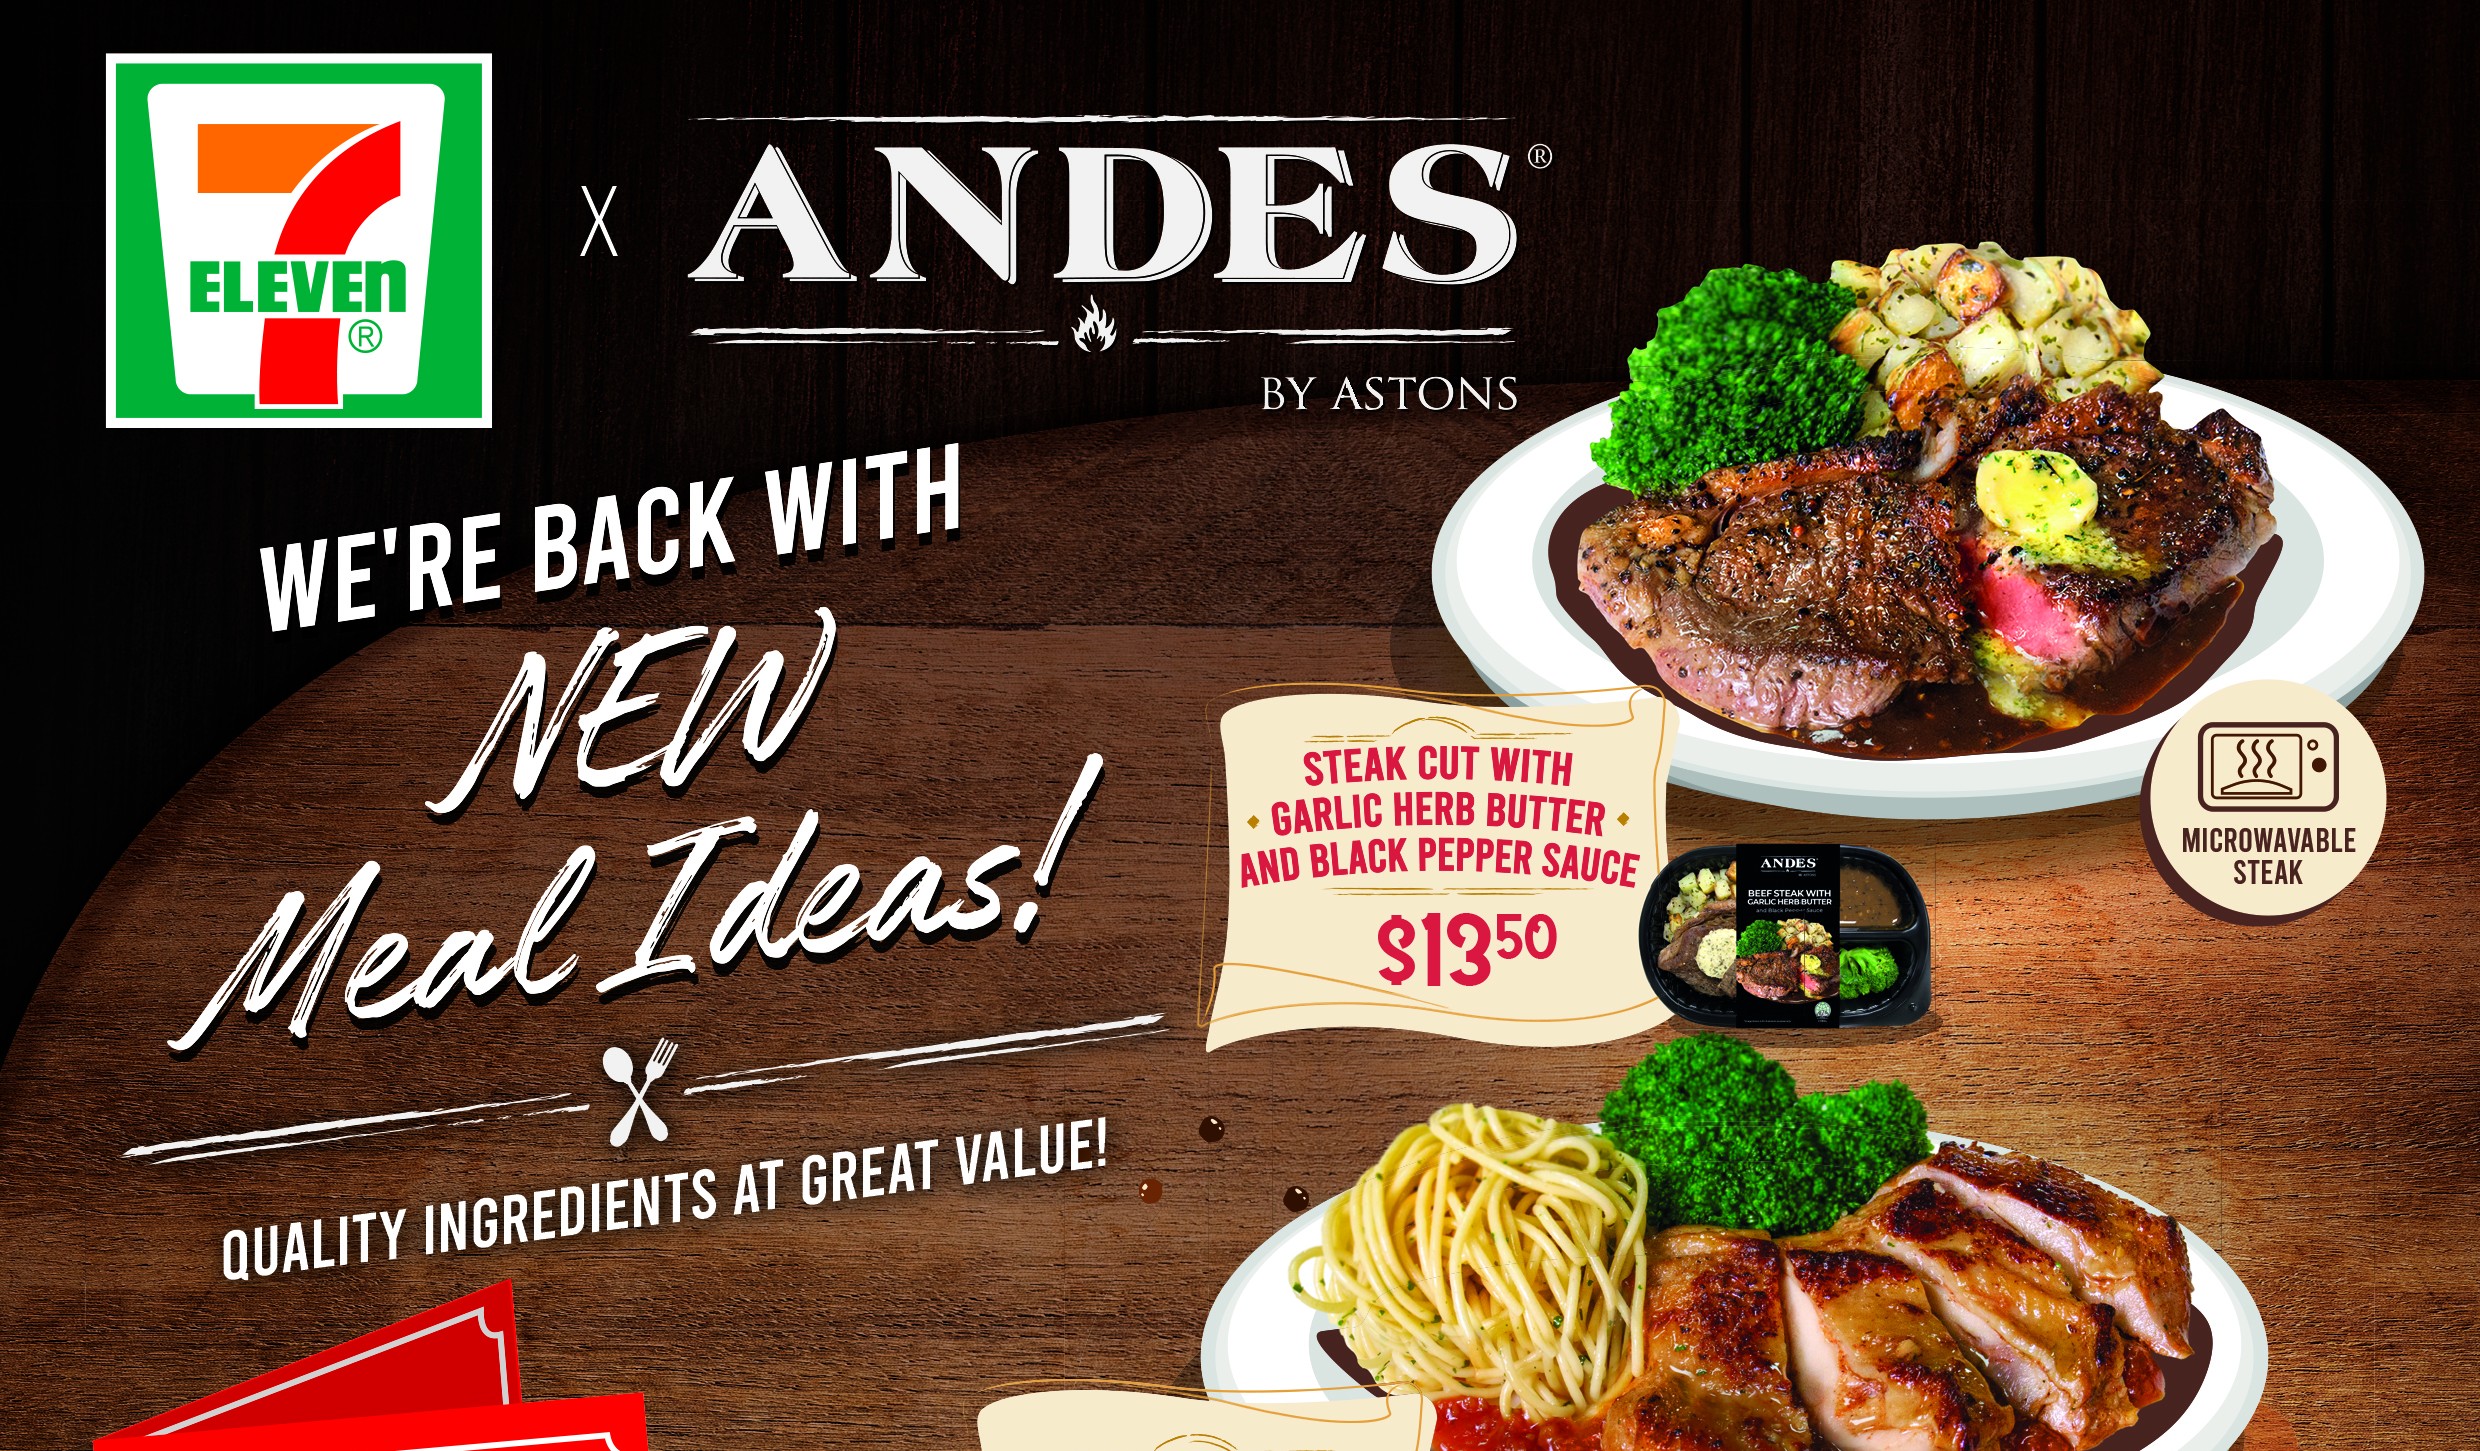 7-Eleven and Andes by Astons Bring More Exciting New Ready-to-Eat Meal Ideas